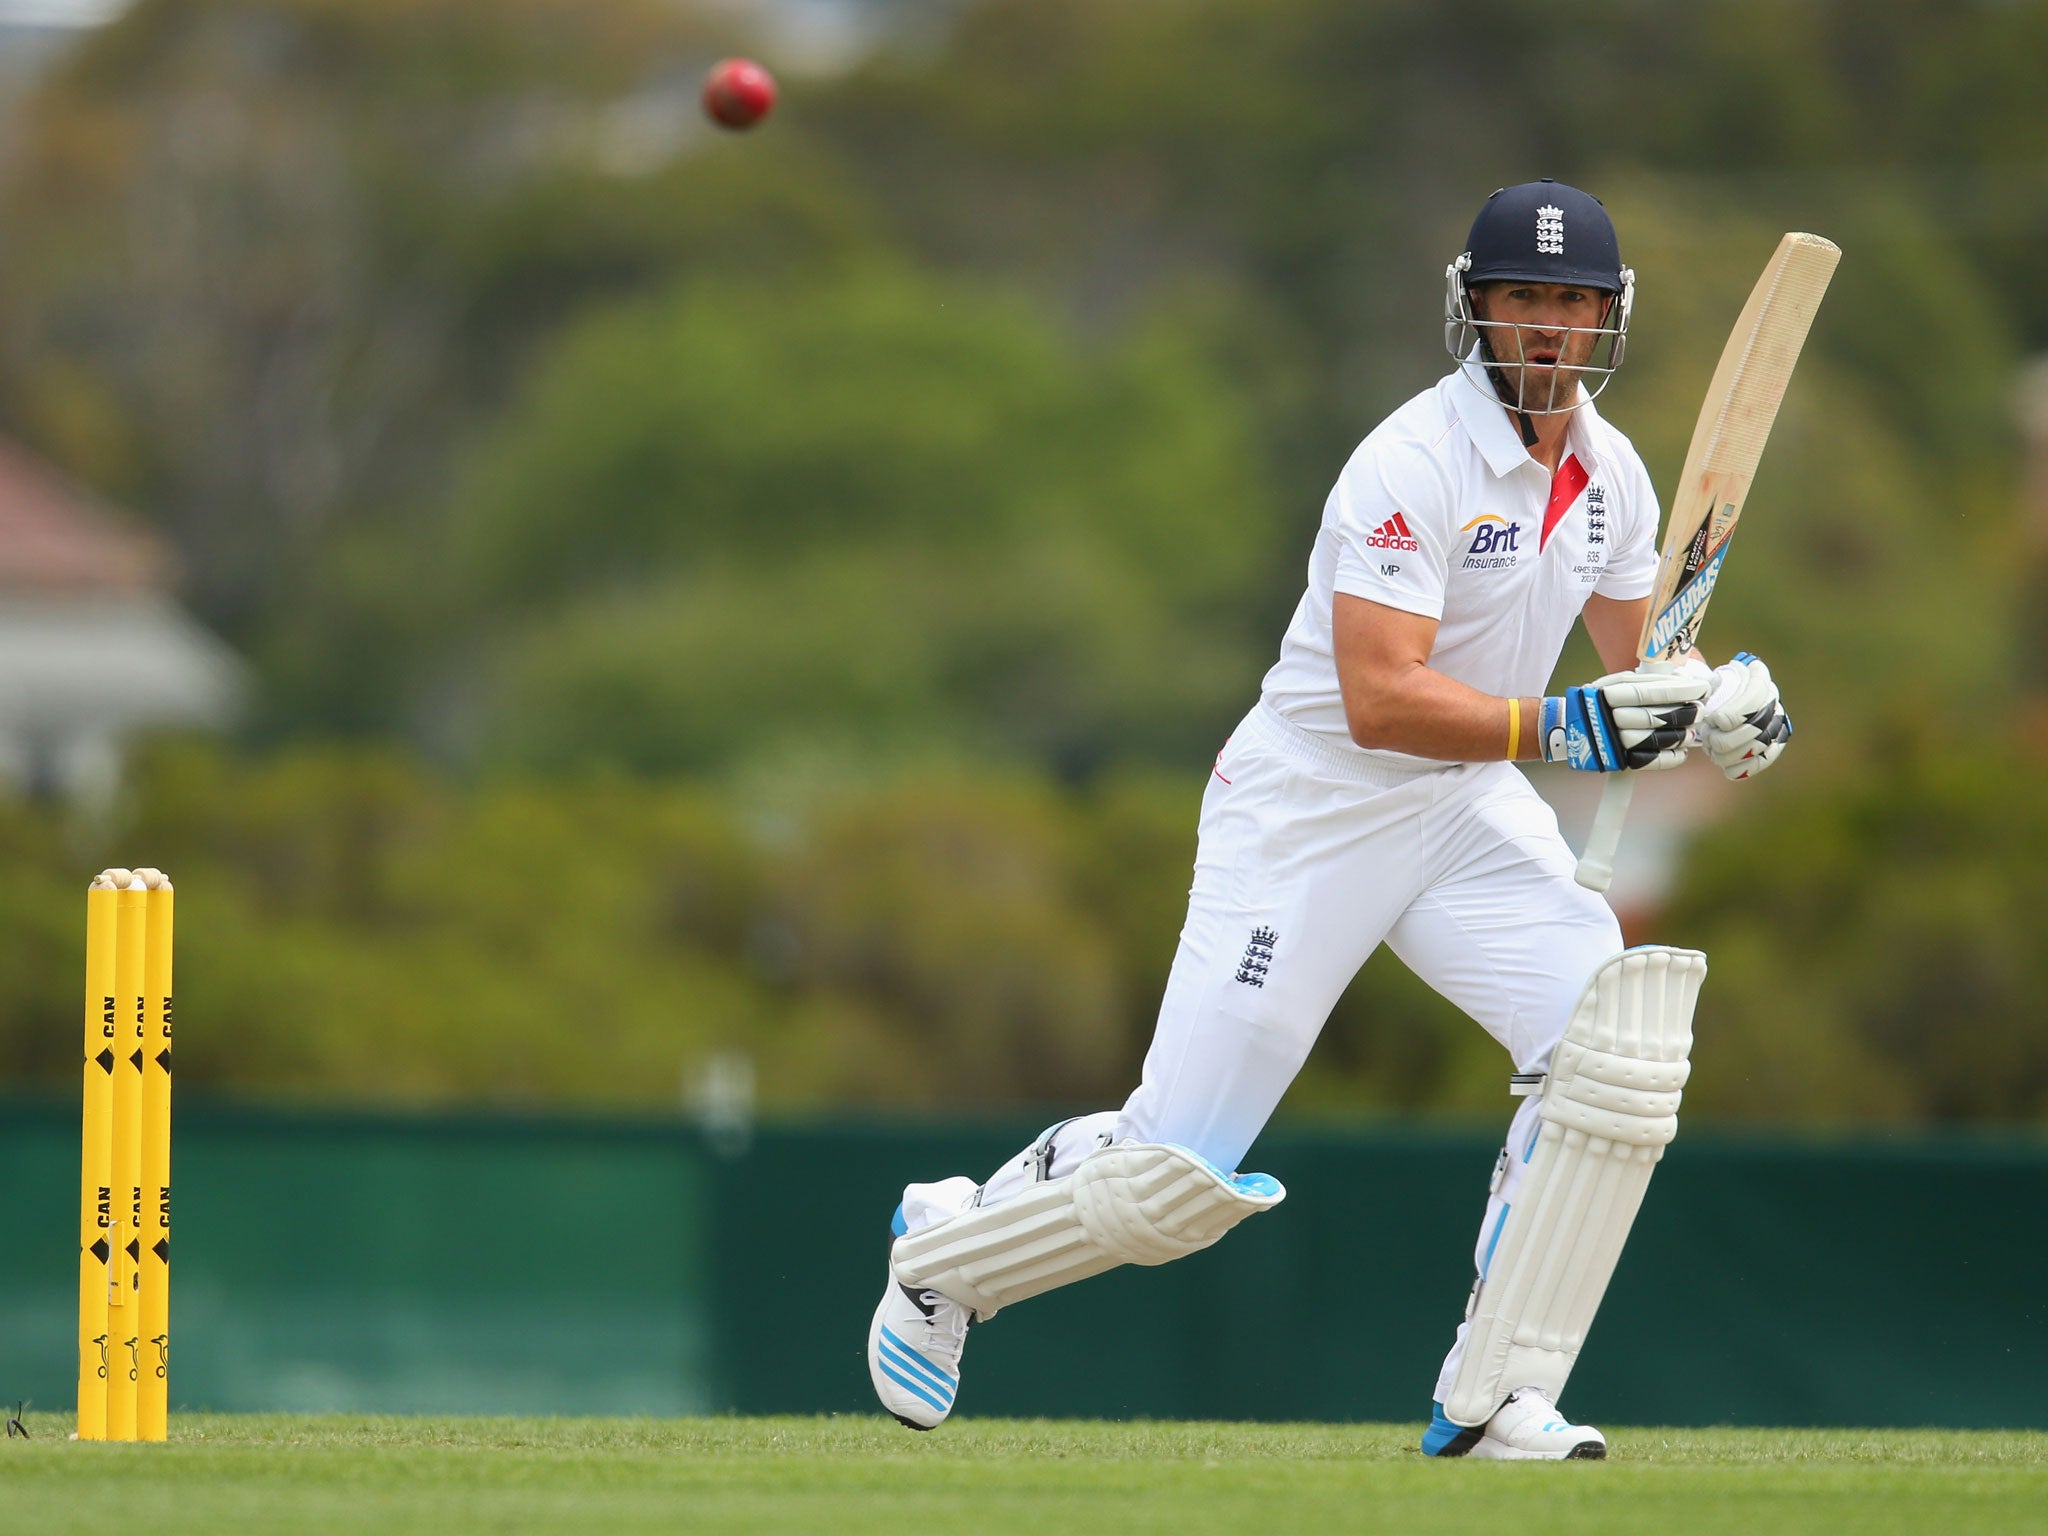 England will be without wicketkeeper Matt Prior for their final Ashes warm-up match